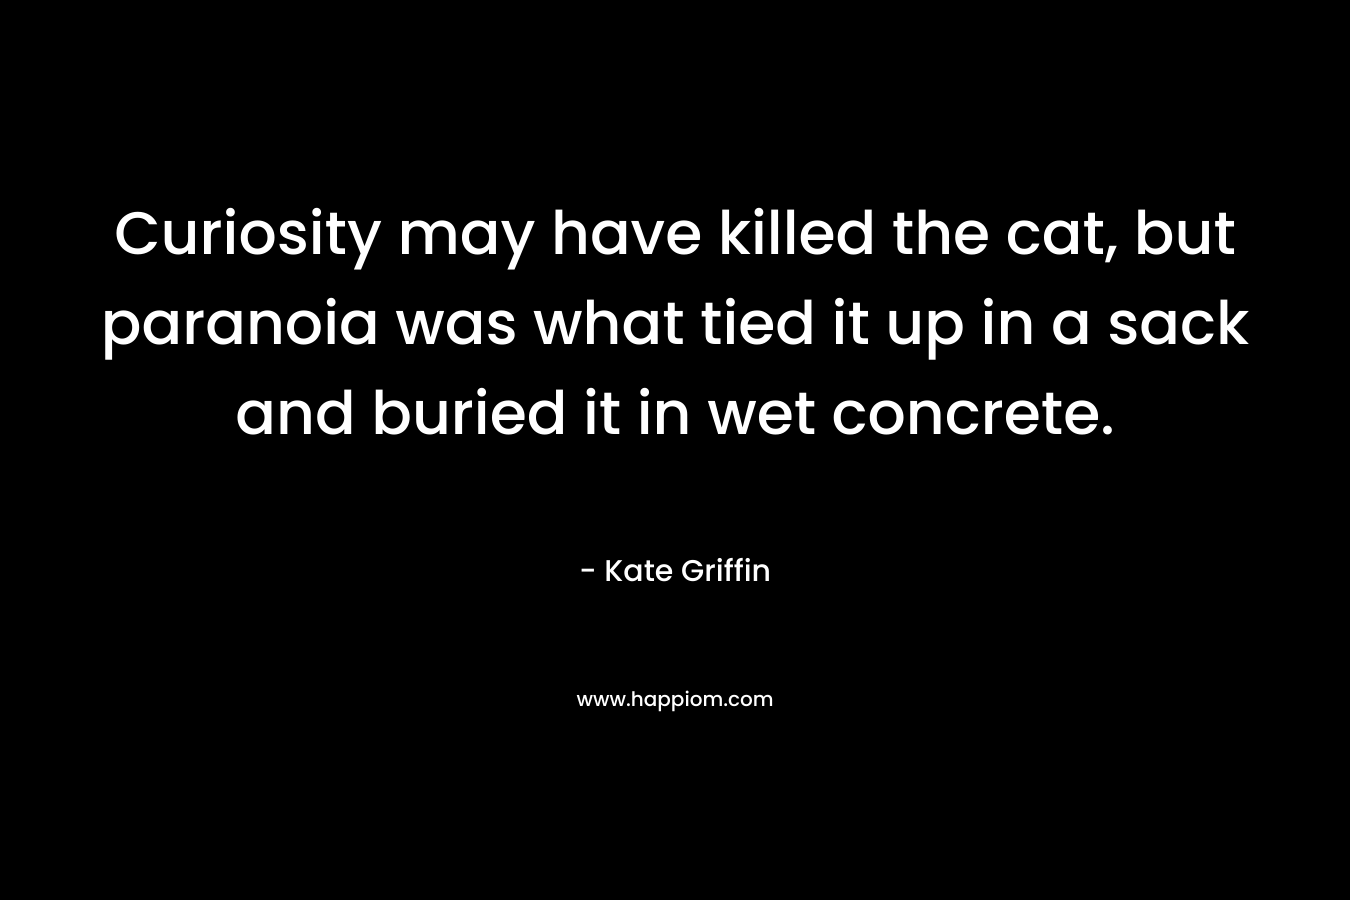 Curiosity may have killed the cat, but paranoia was what tied it up in a sack and buried it in wet concrete.